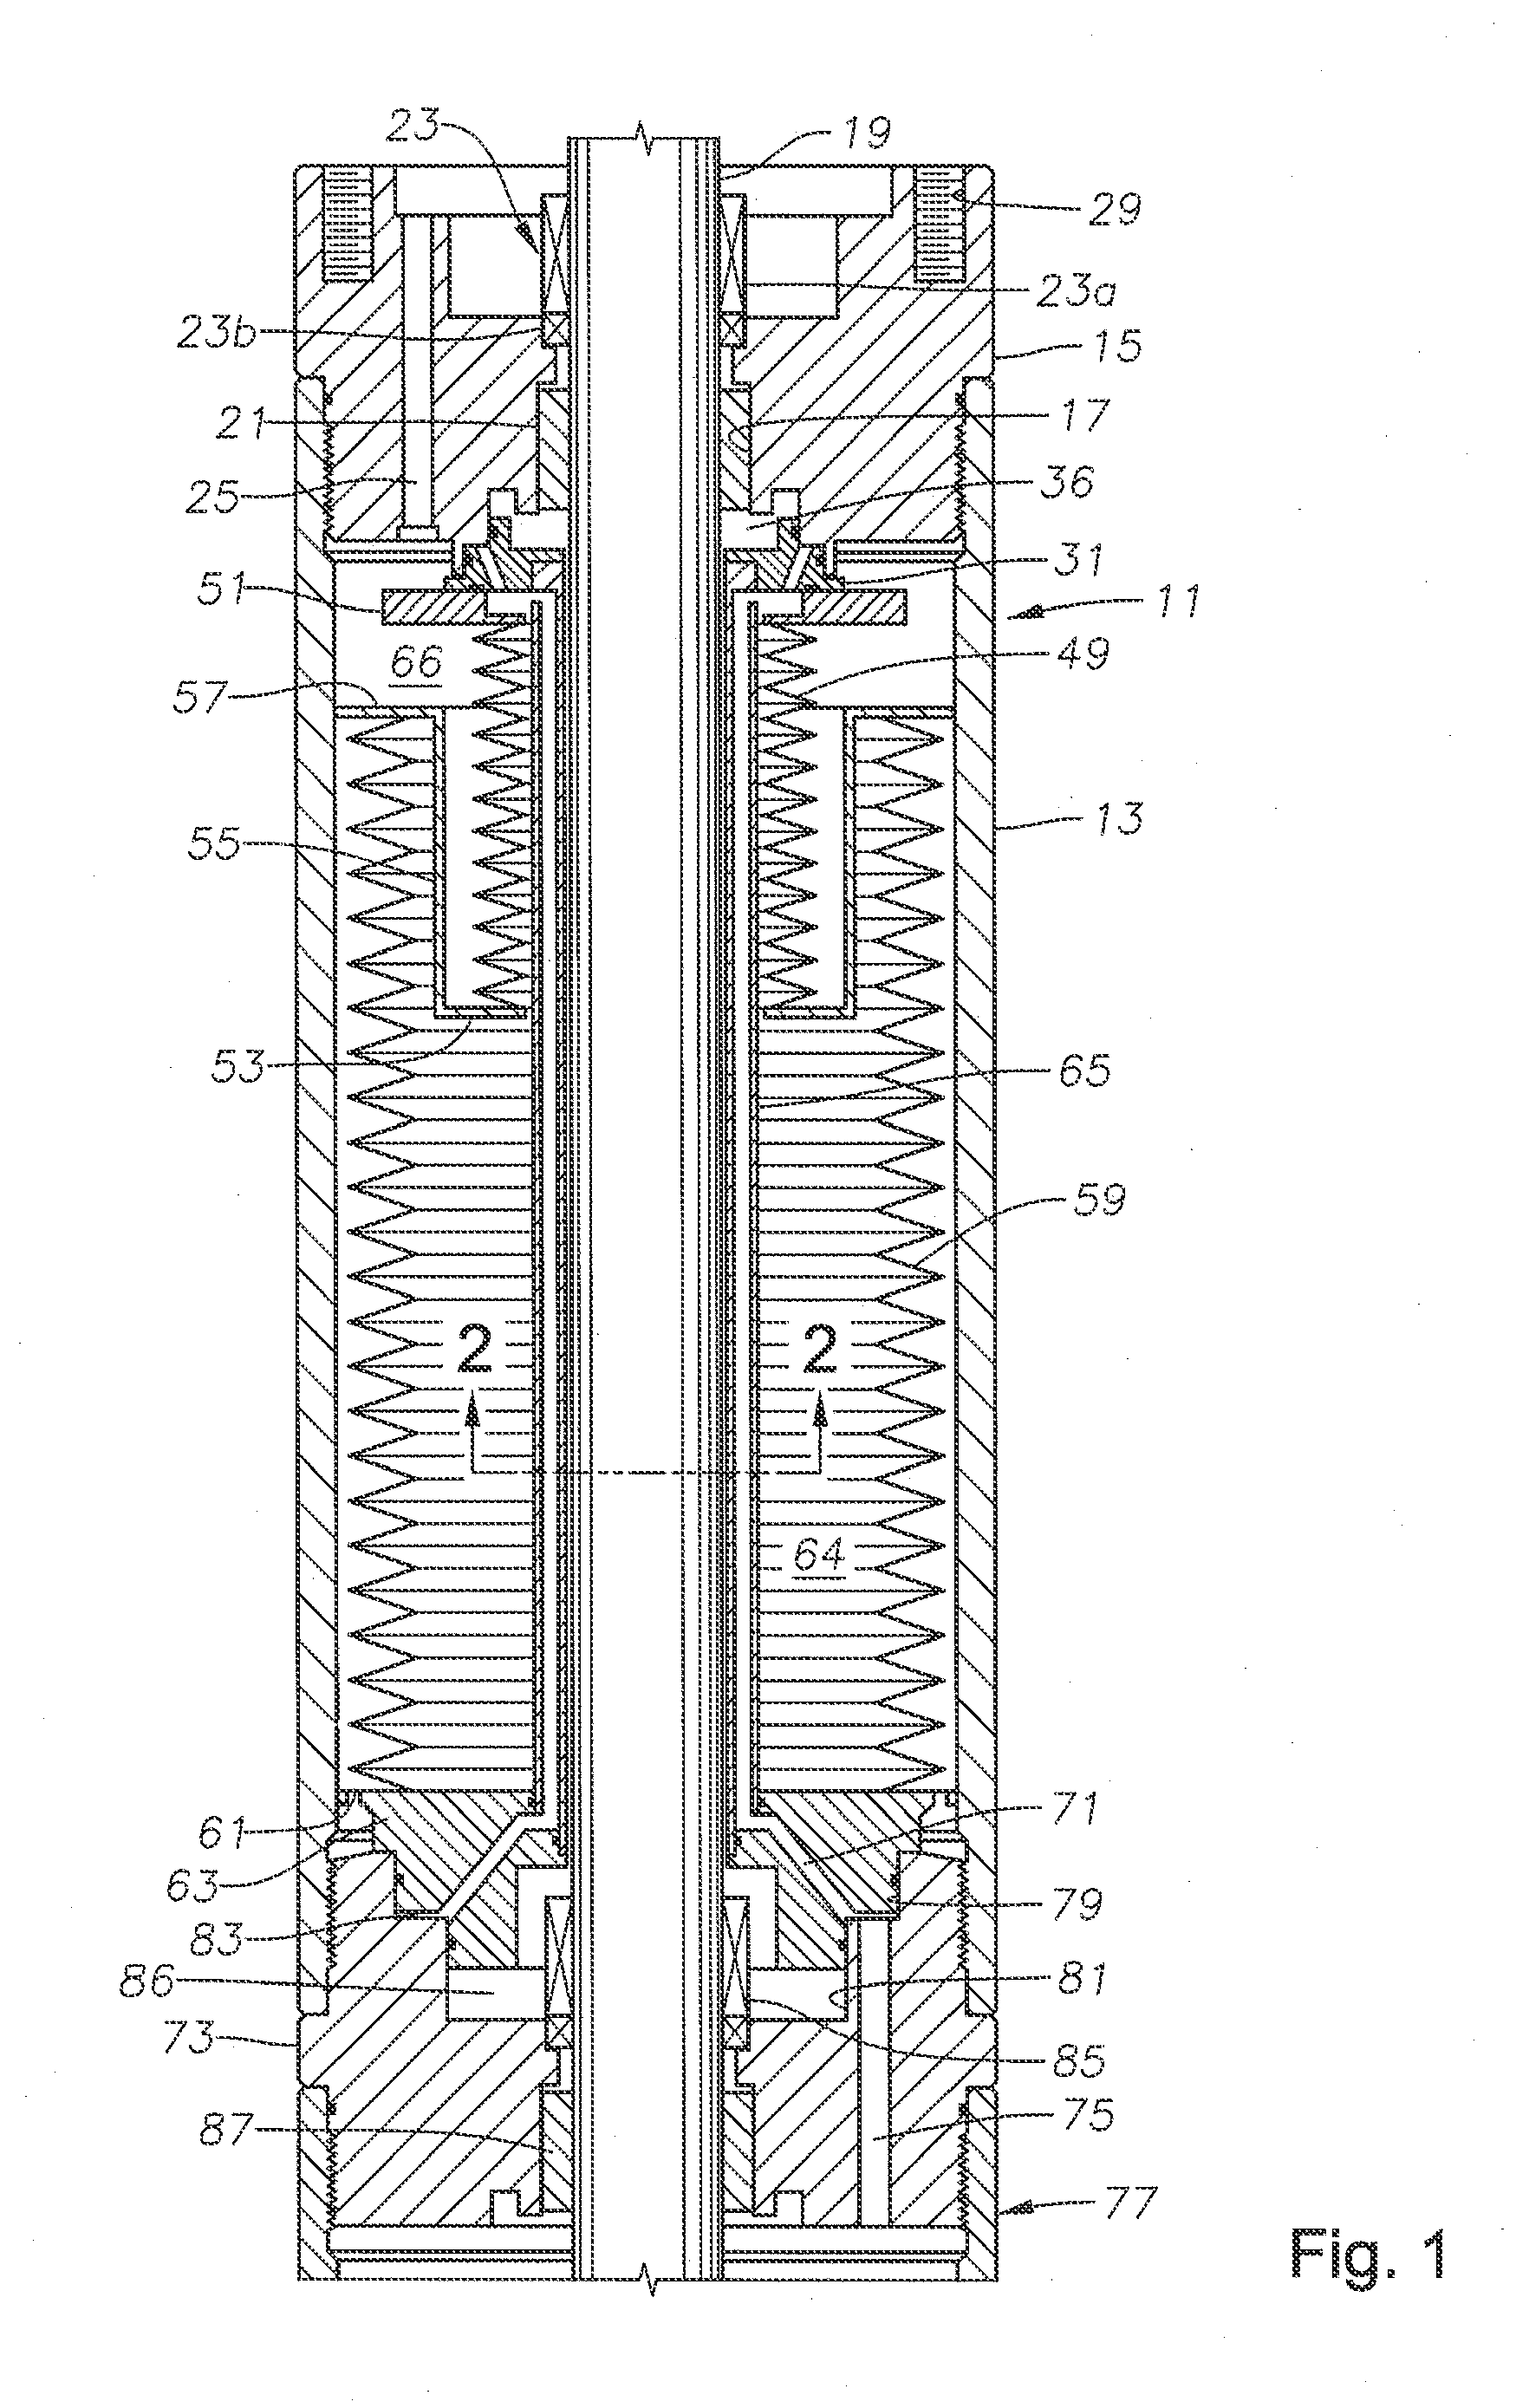 Well Pump with Seal Section Having a Labyrinth Flow Path in a Metal Bellows